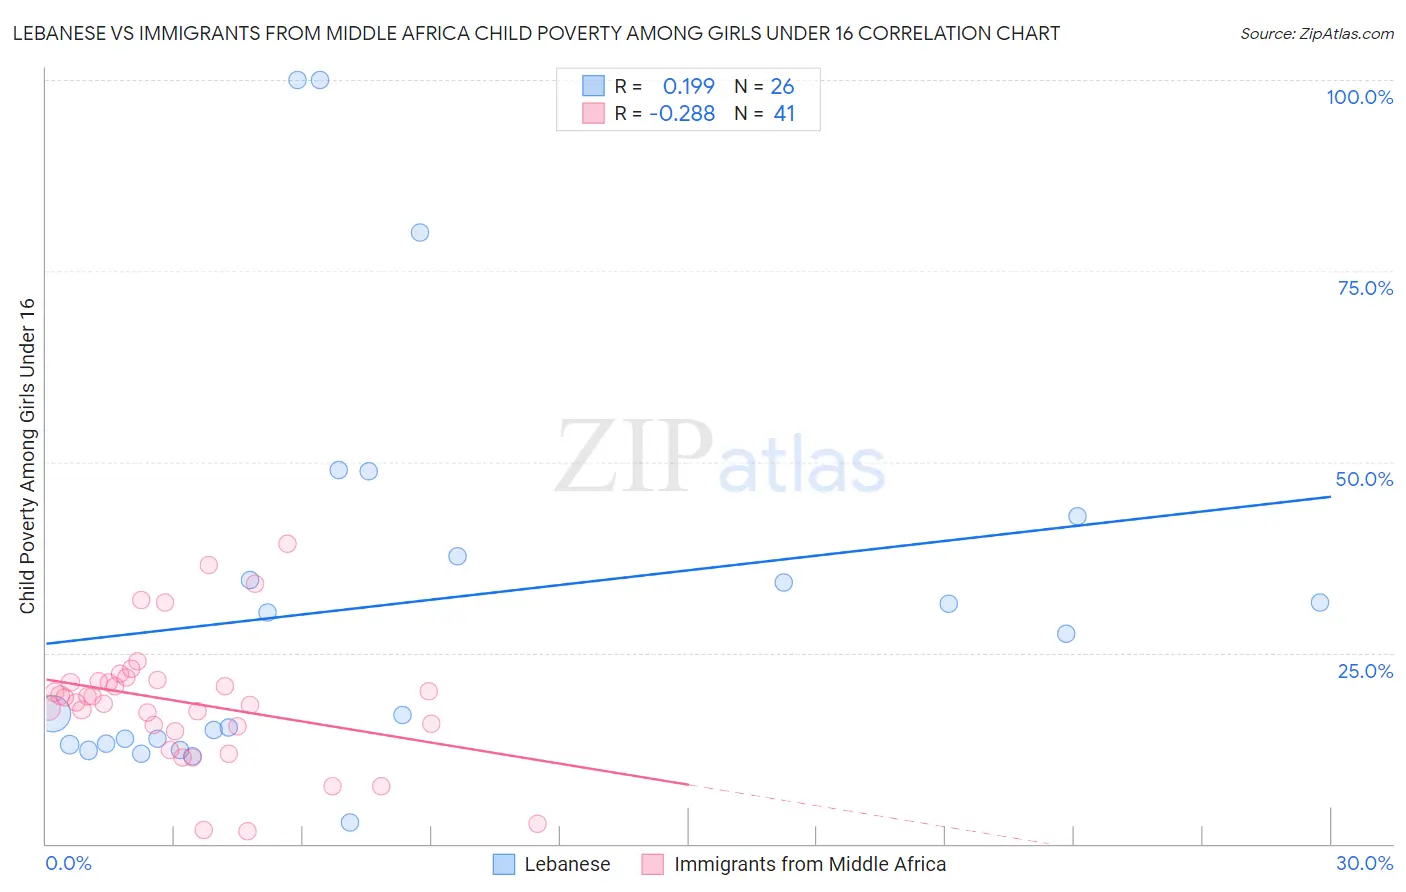 Lebanese vs Immigrants from Middle Africa Child Poverty Among Girls Under 16